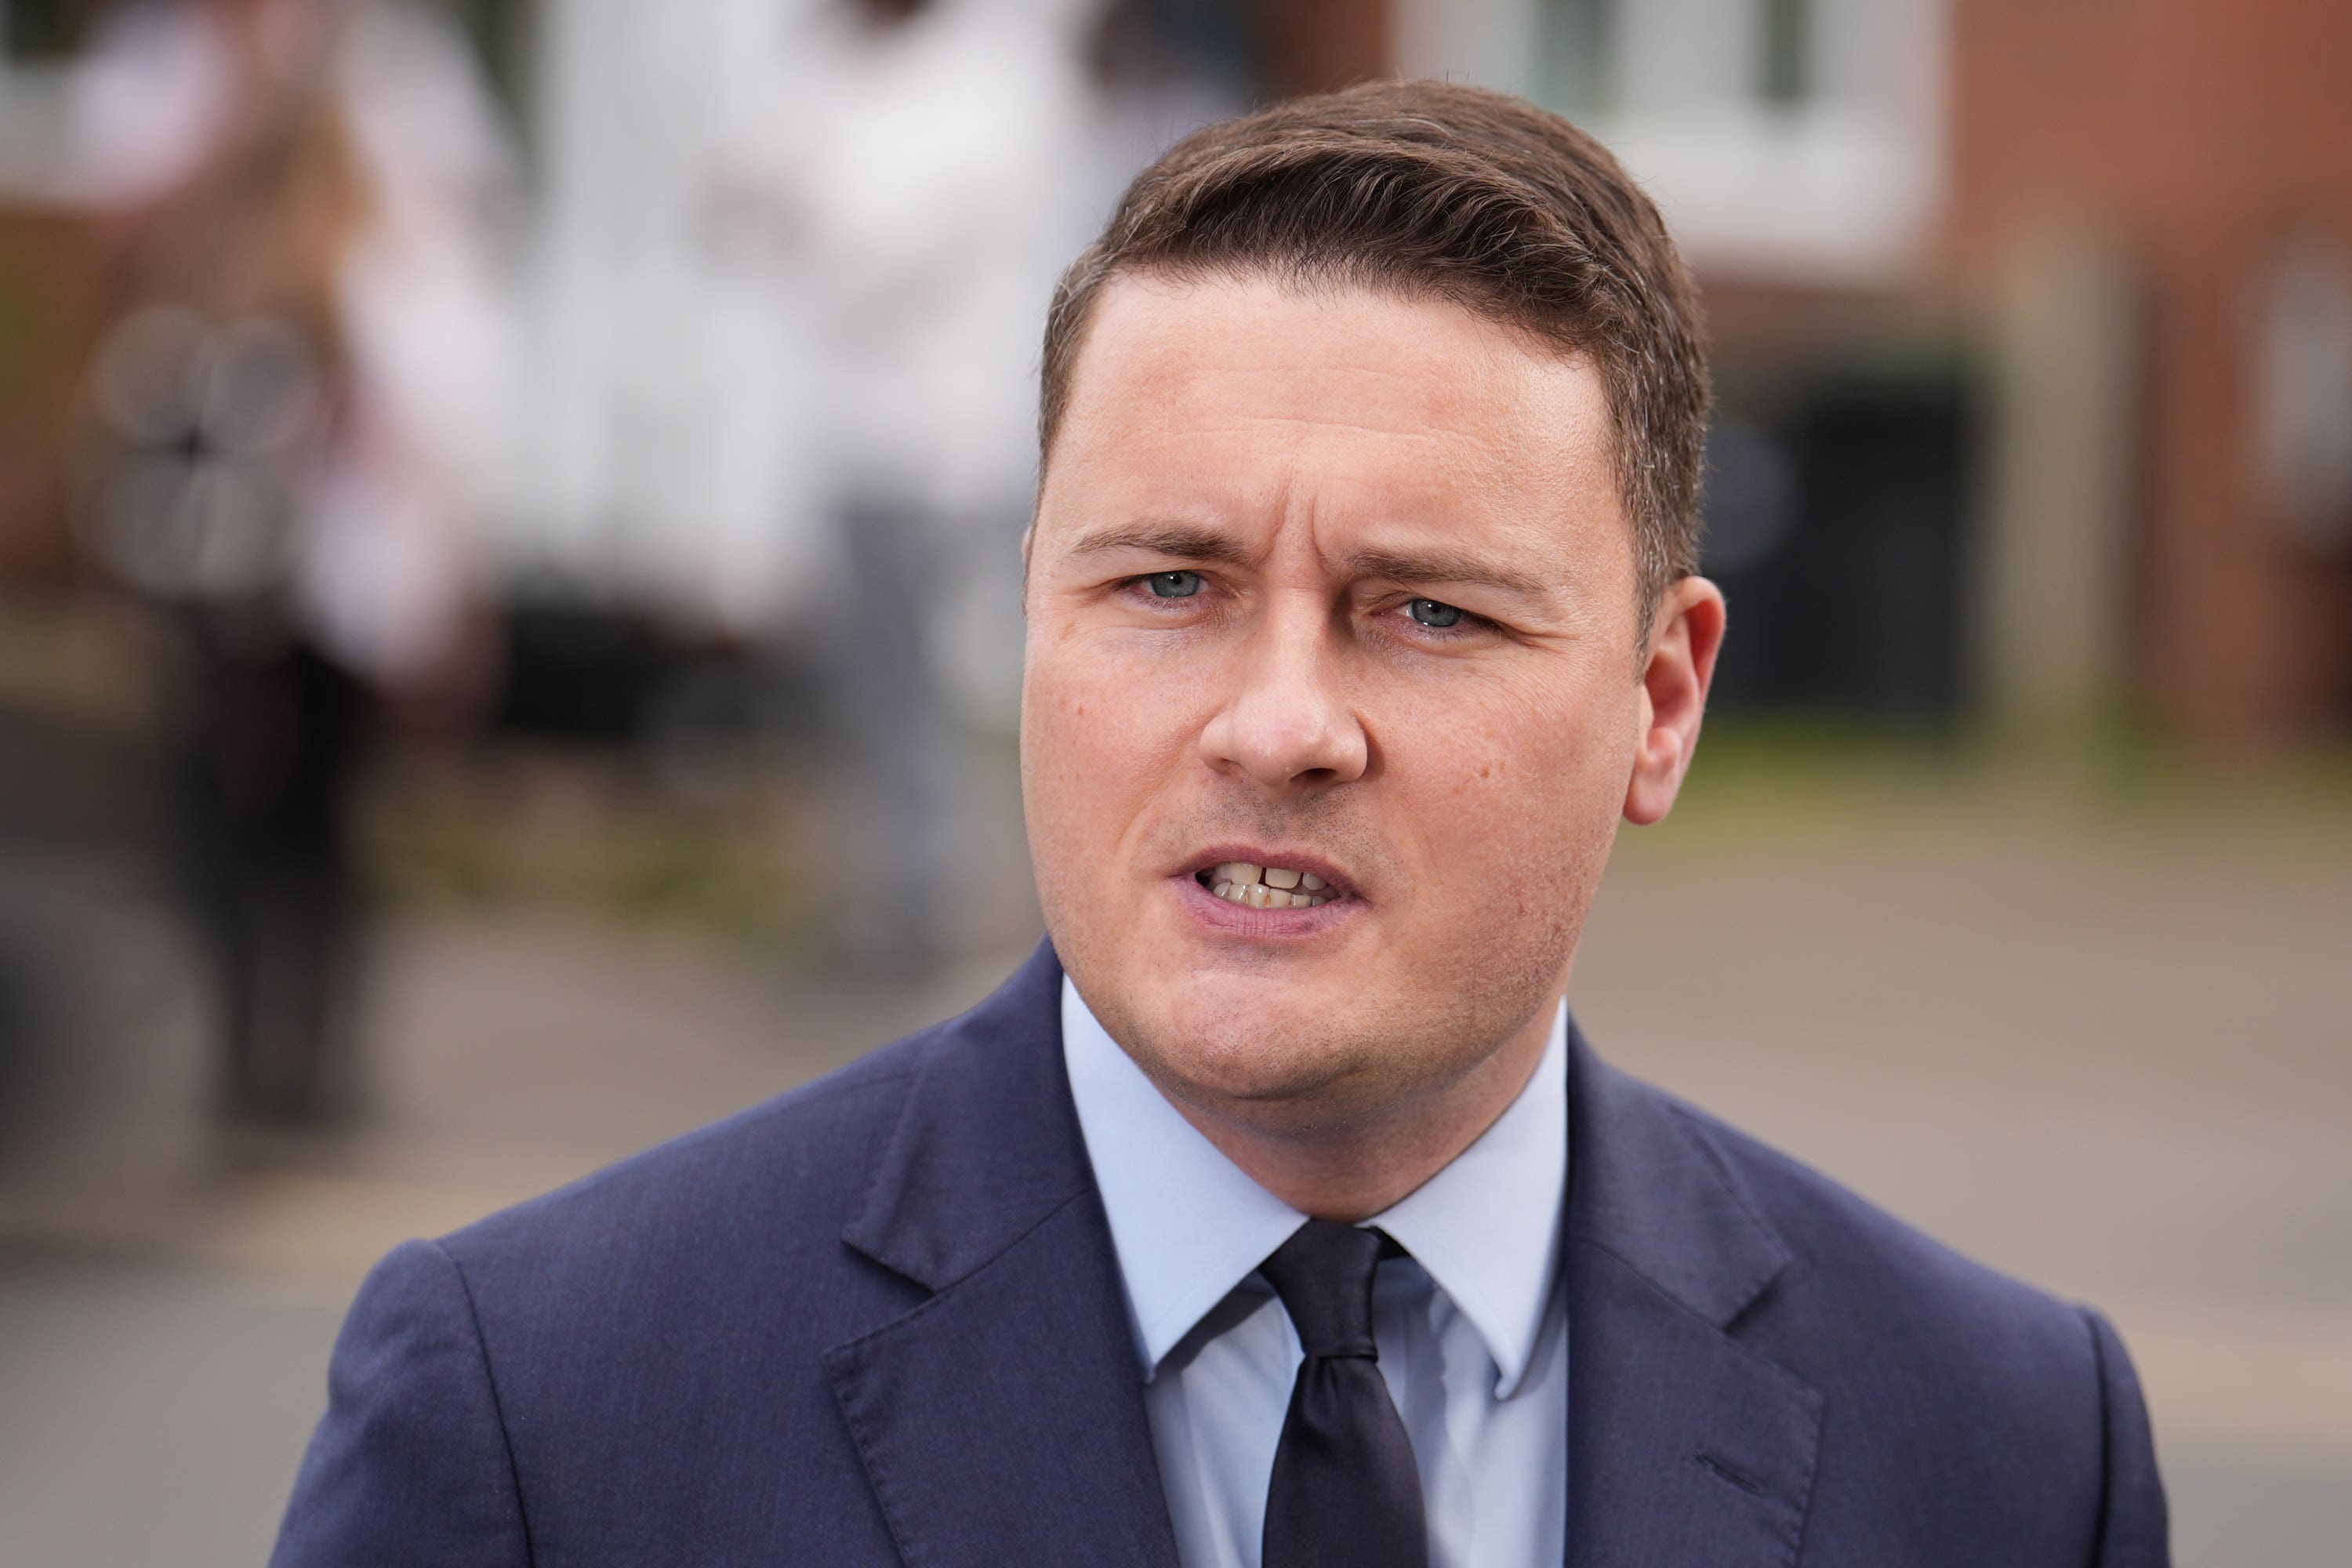 Shadow health secretary Wes Streeting claims the pledge is ‘another empty promise’ by the Tories